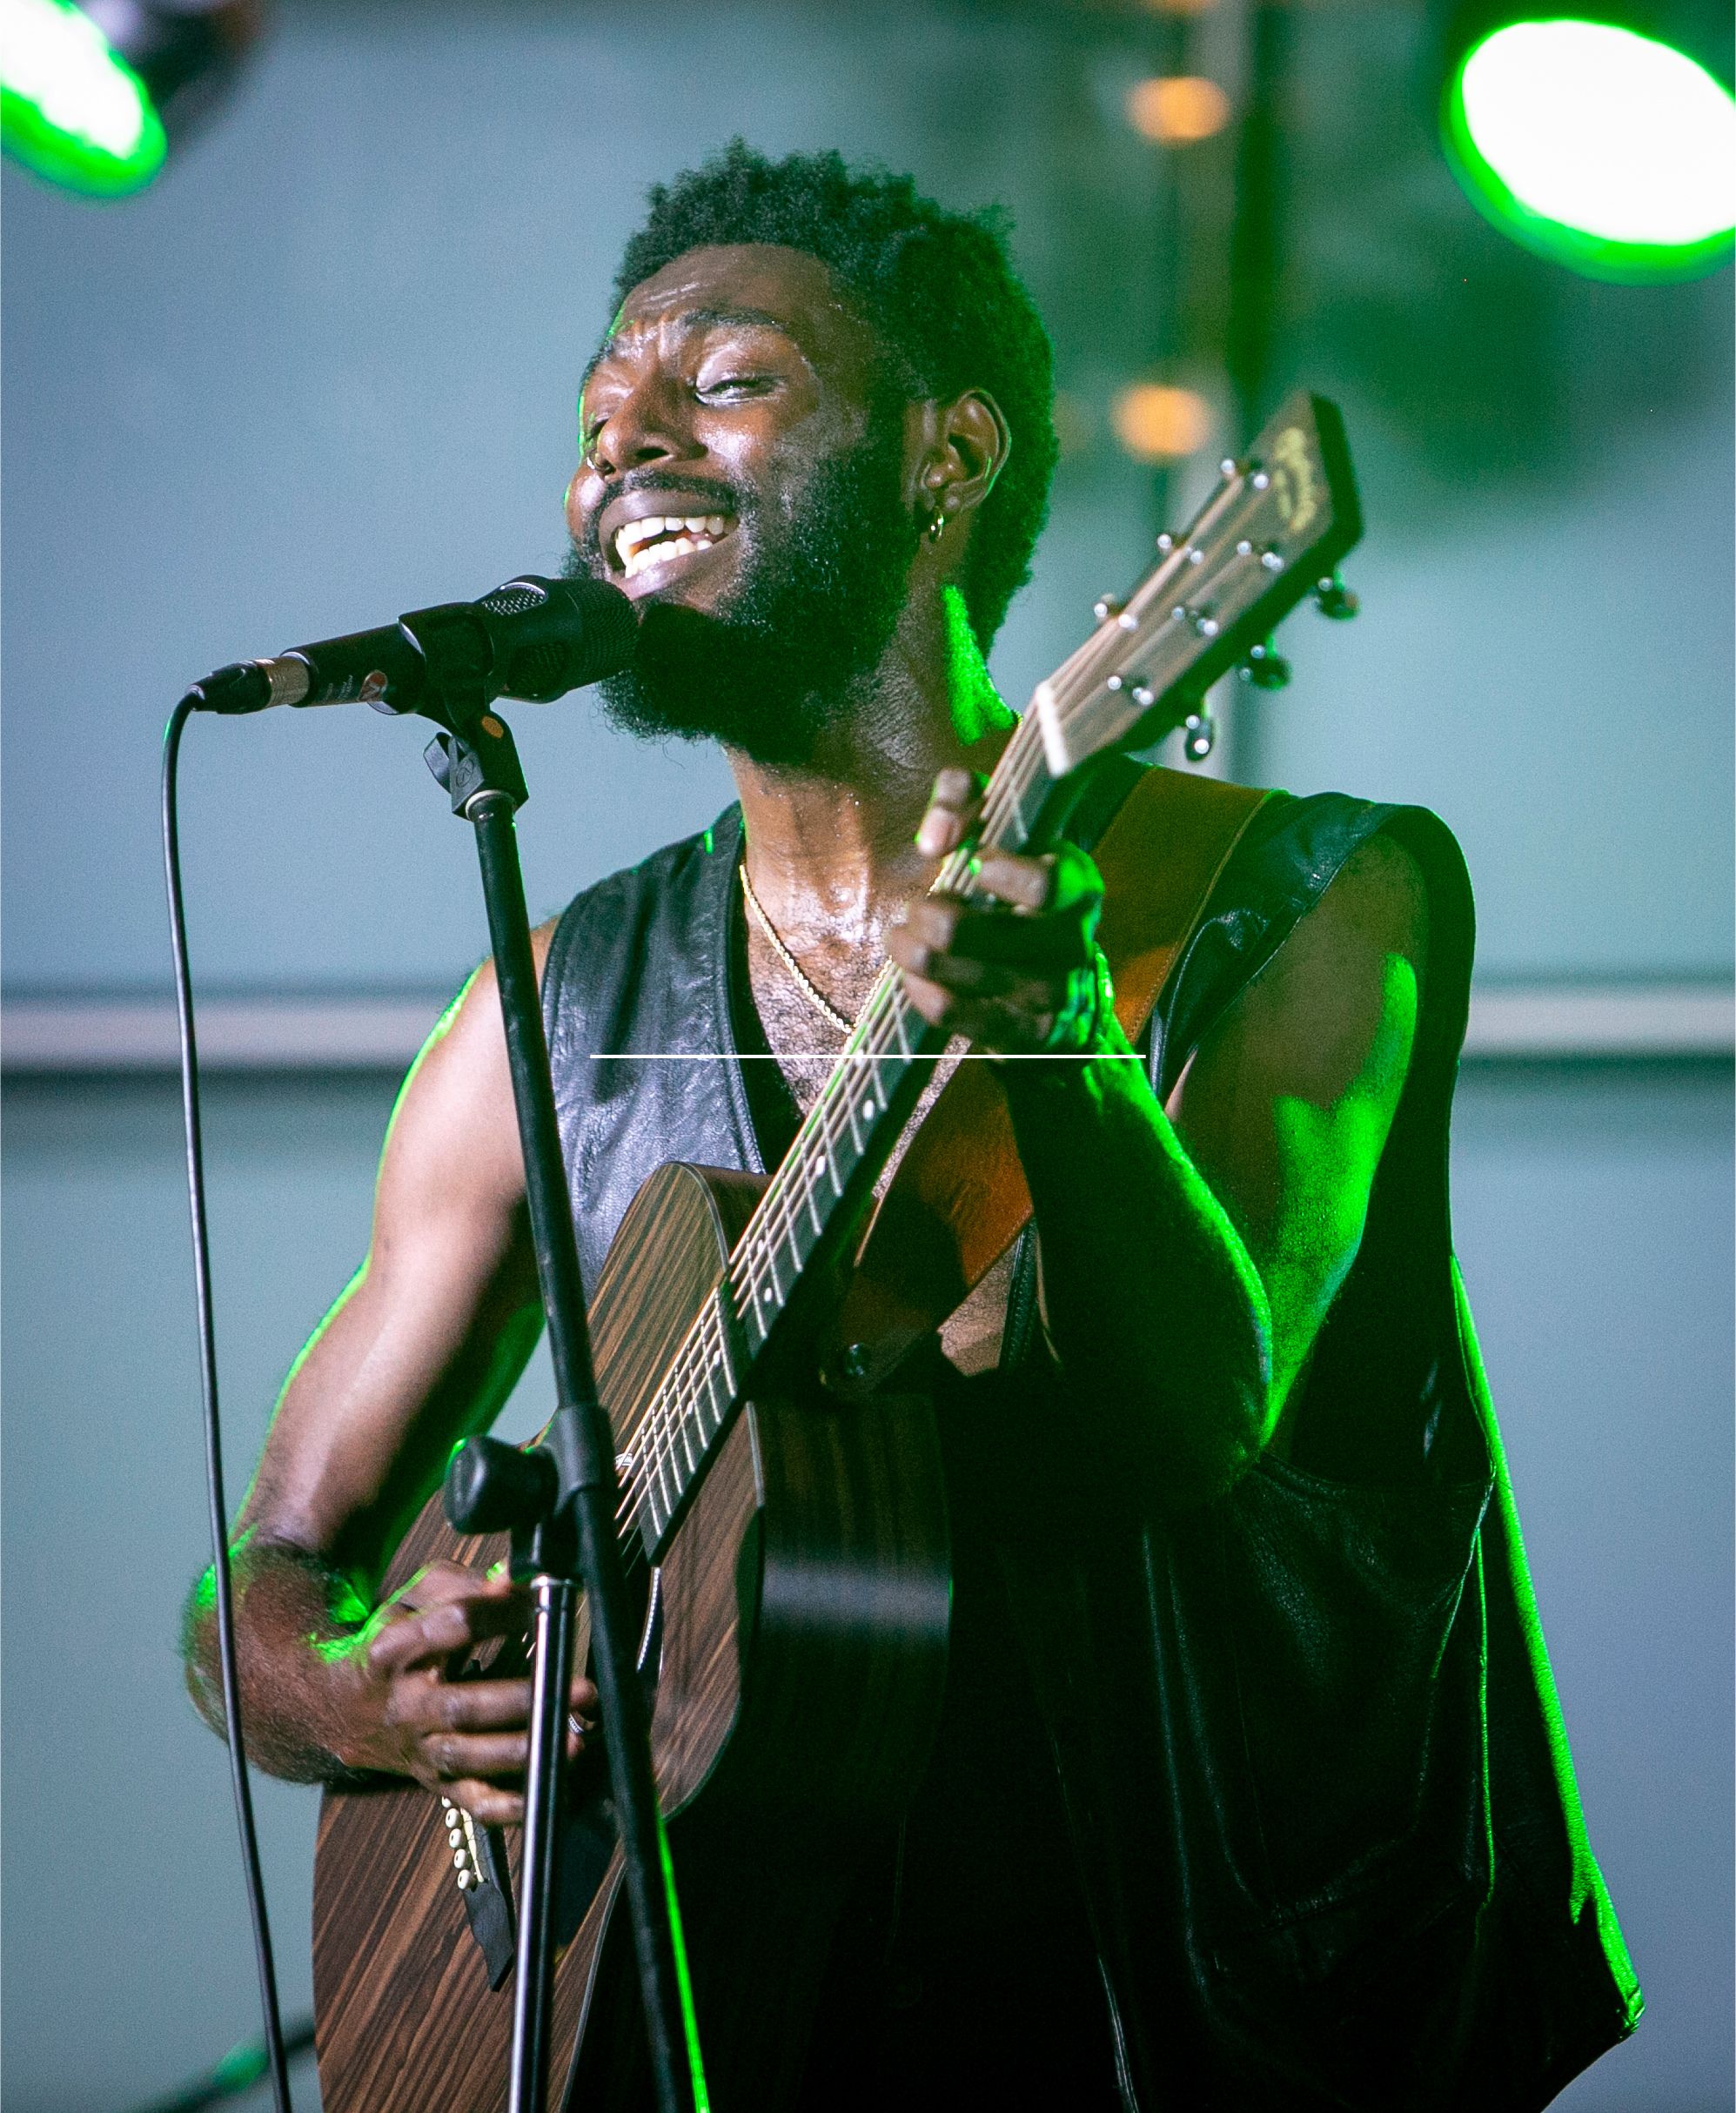 A bearded man in a black vest, lit by green lights behind him, leans into a microphone while singing and playing guitar